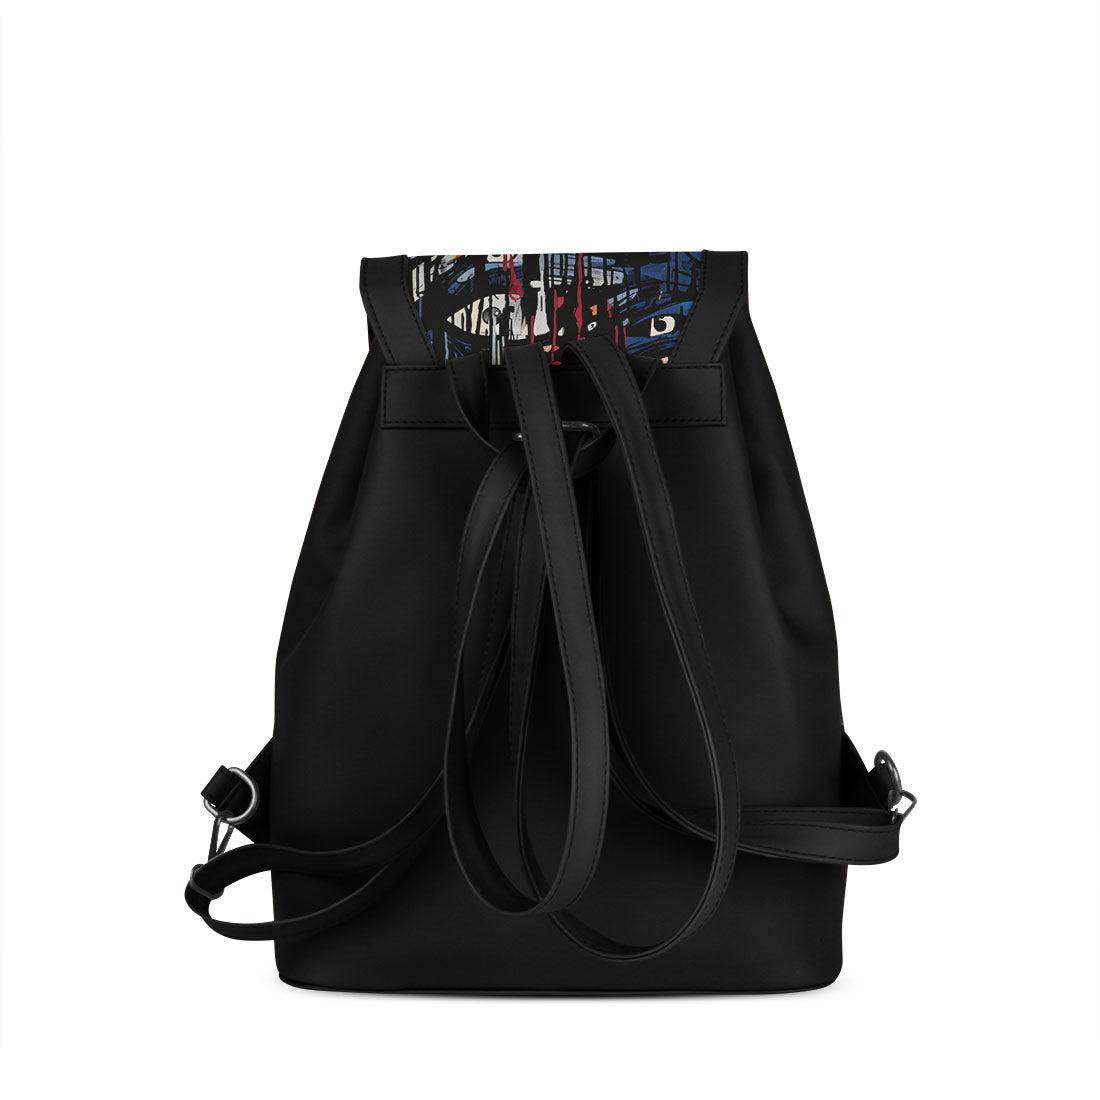 Black City Serenade Backpack Abyssal Observers - CANVAEGYPT